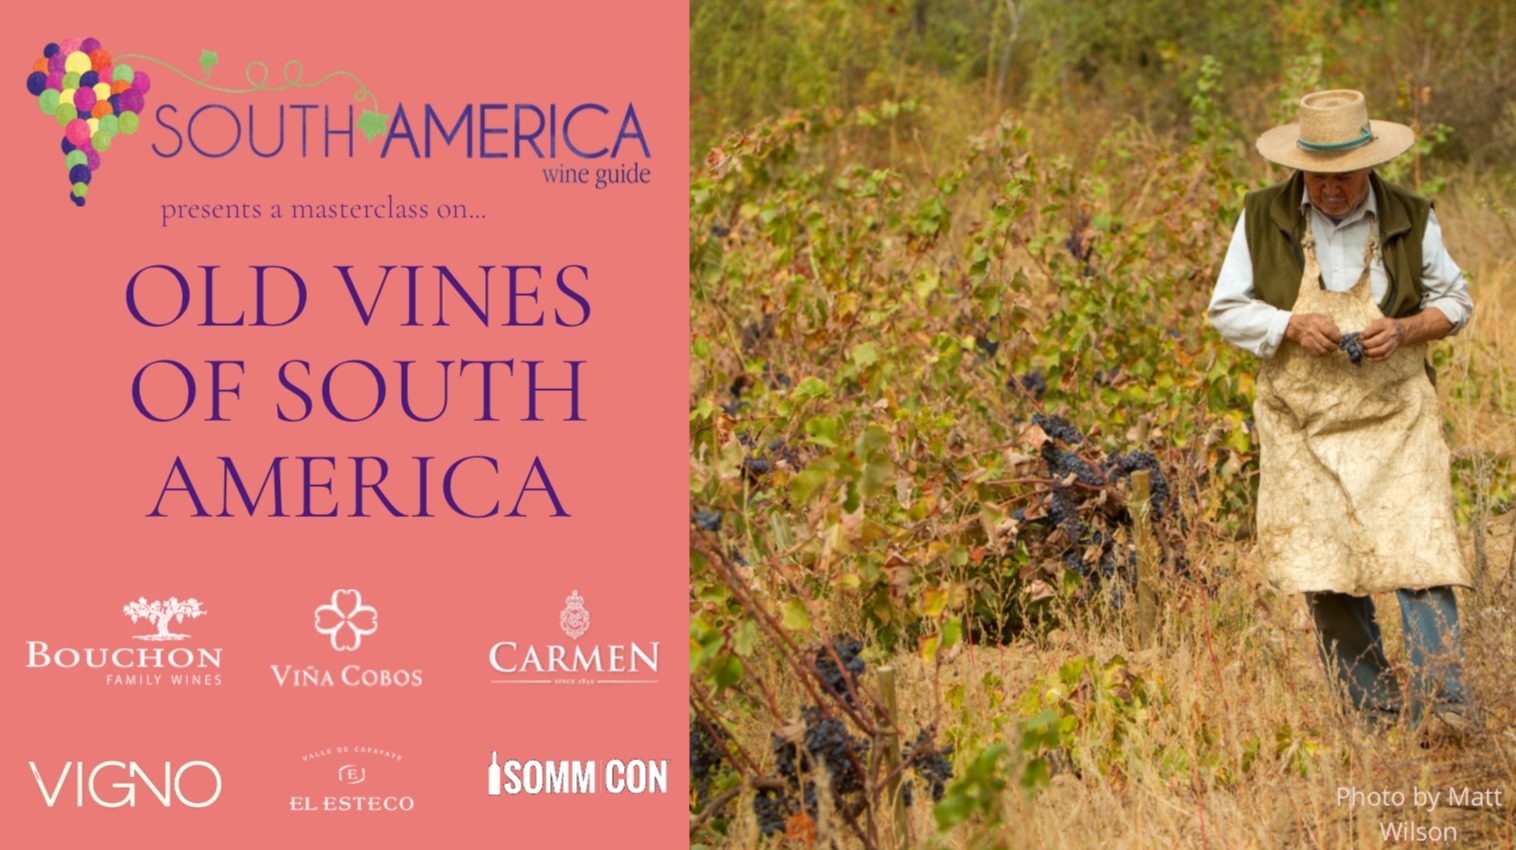 Masterclass on the old vines of South America